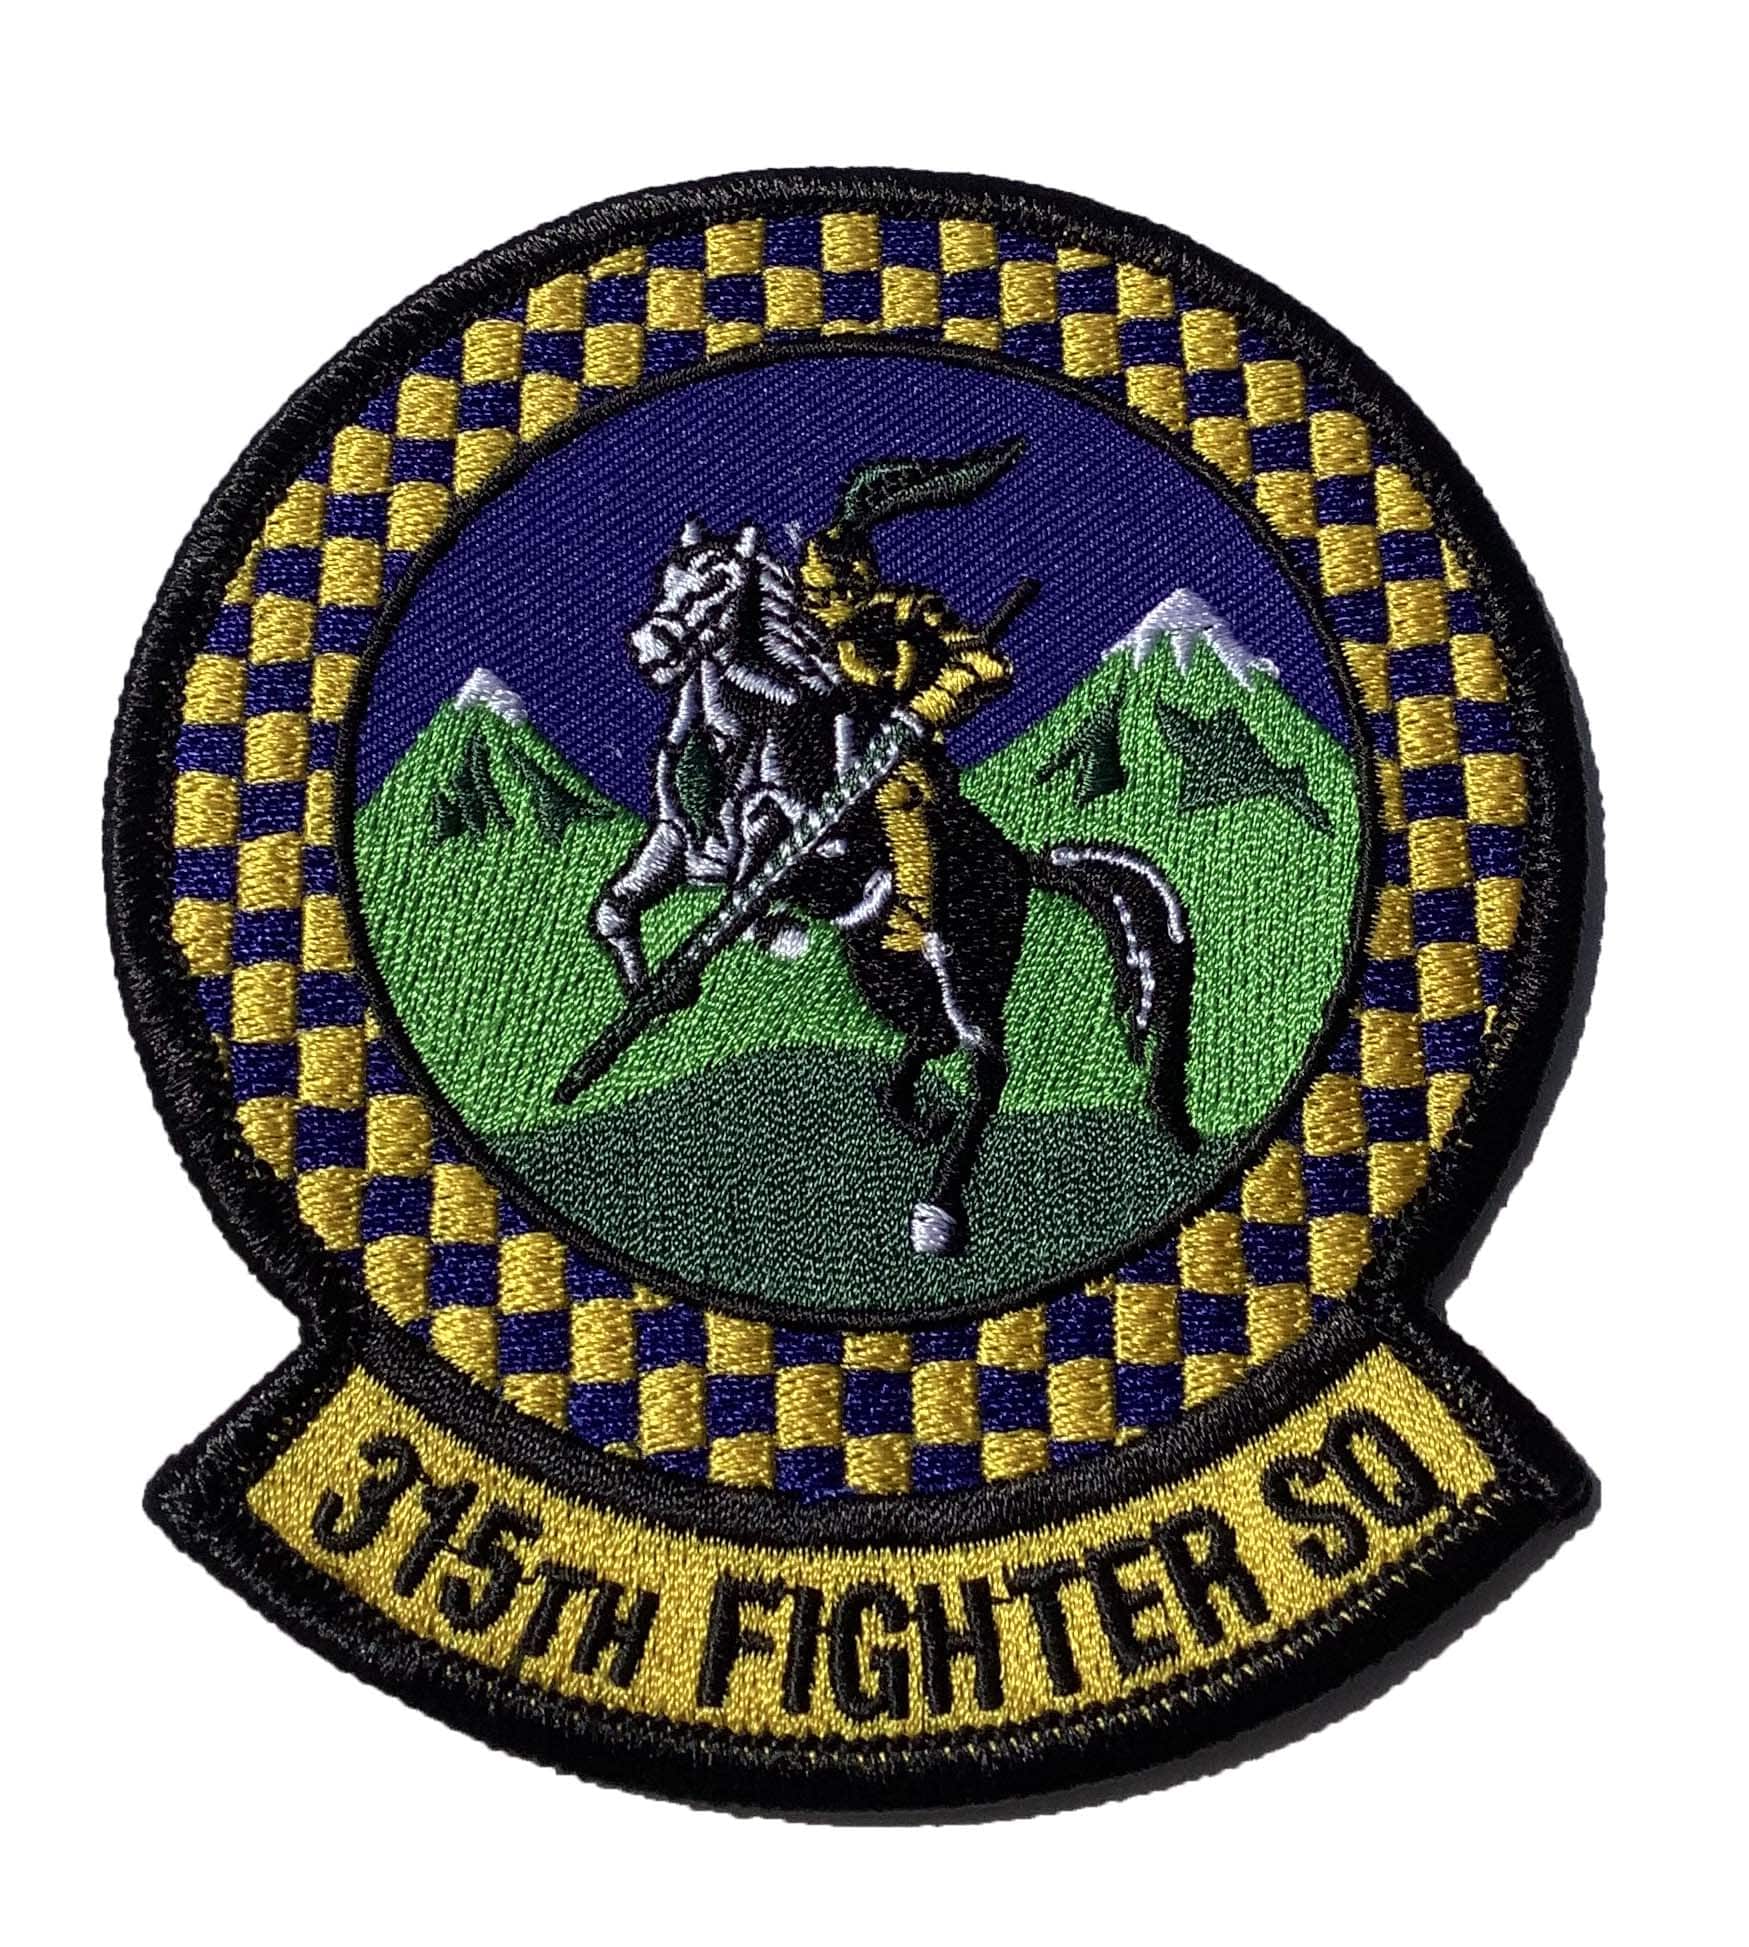 315th Fighter Squadron Patch - Sew On